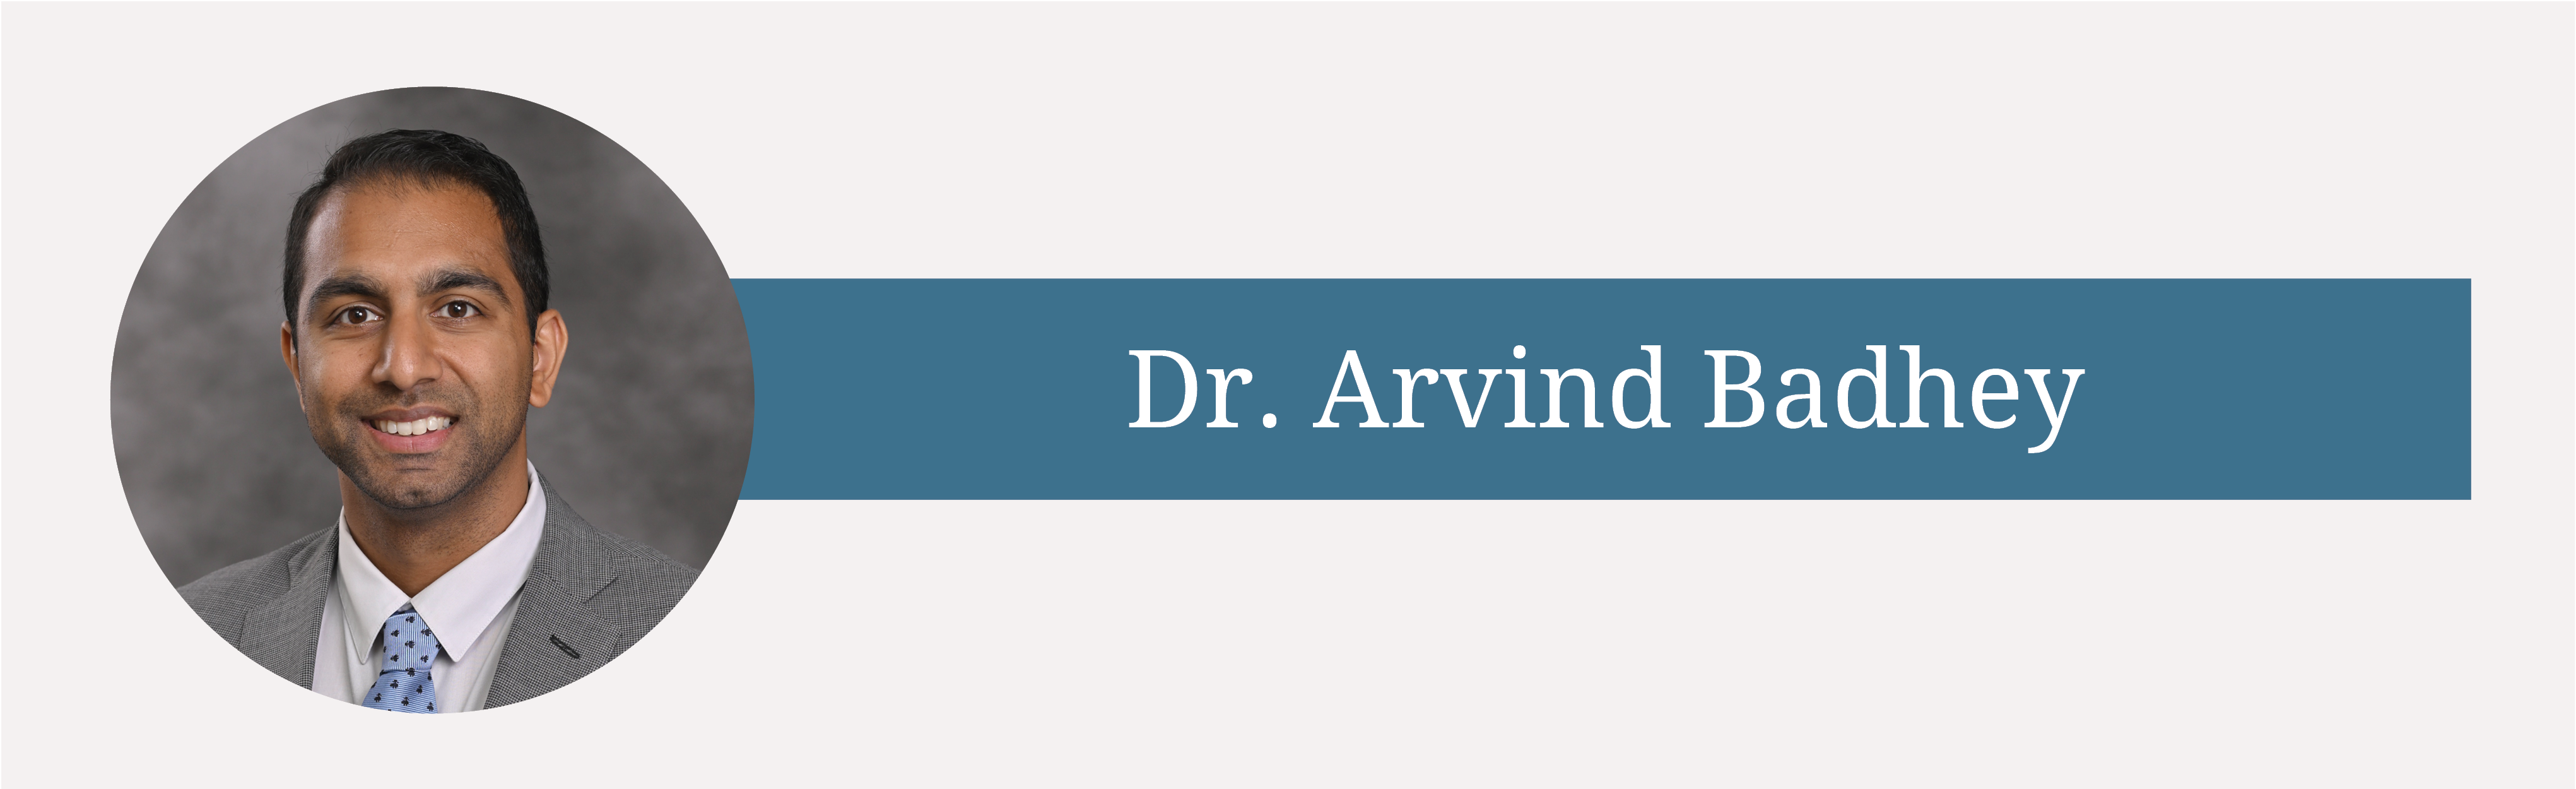 Dr. Arvind Badhey Named Director of Microvascular Reconstructive Surgery at White Plains Hospital